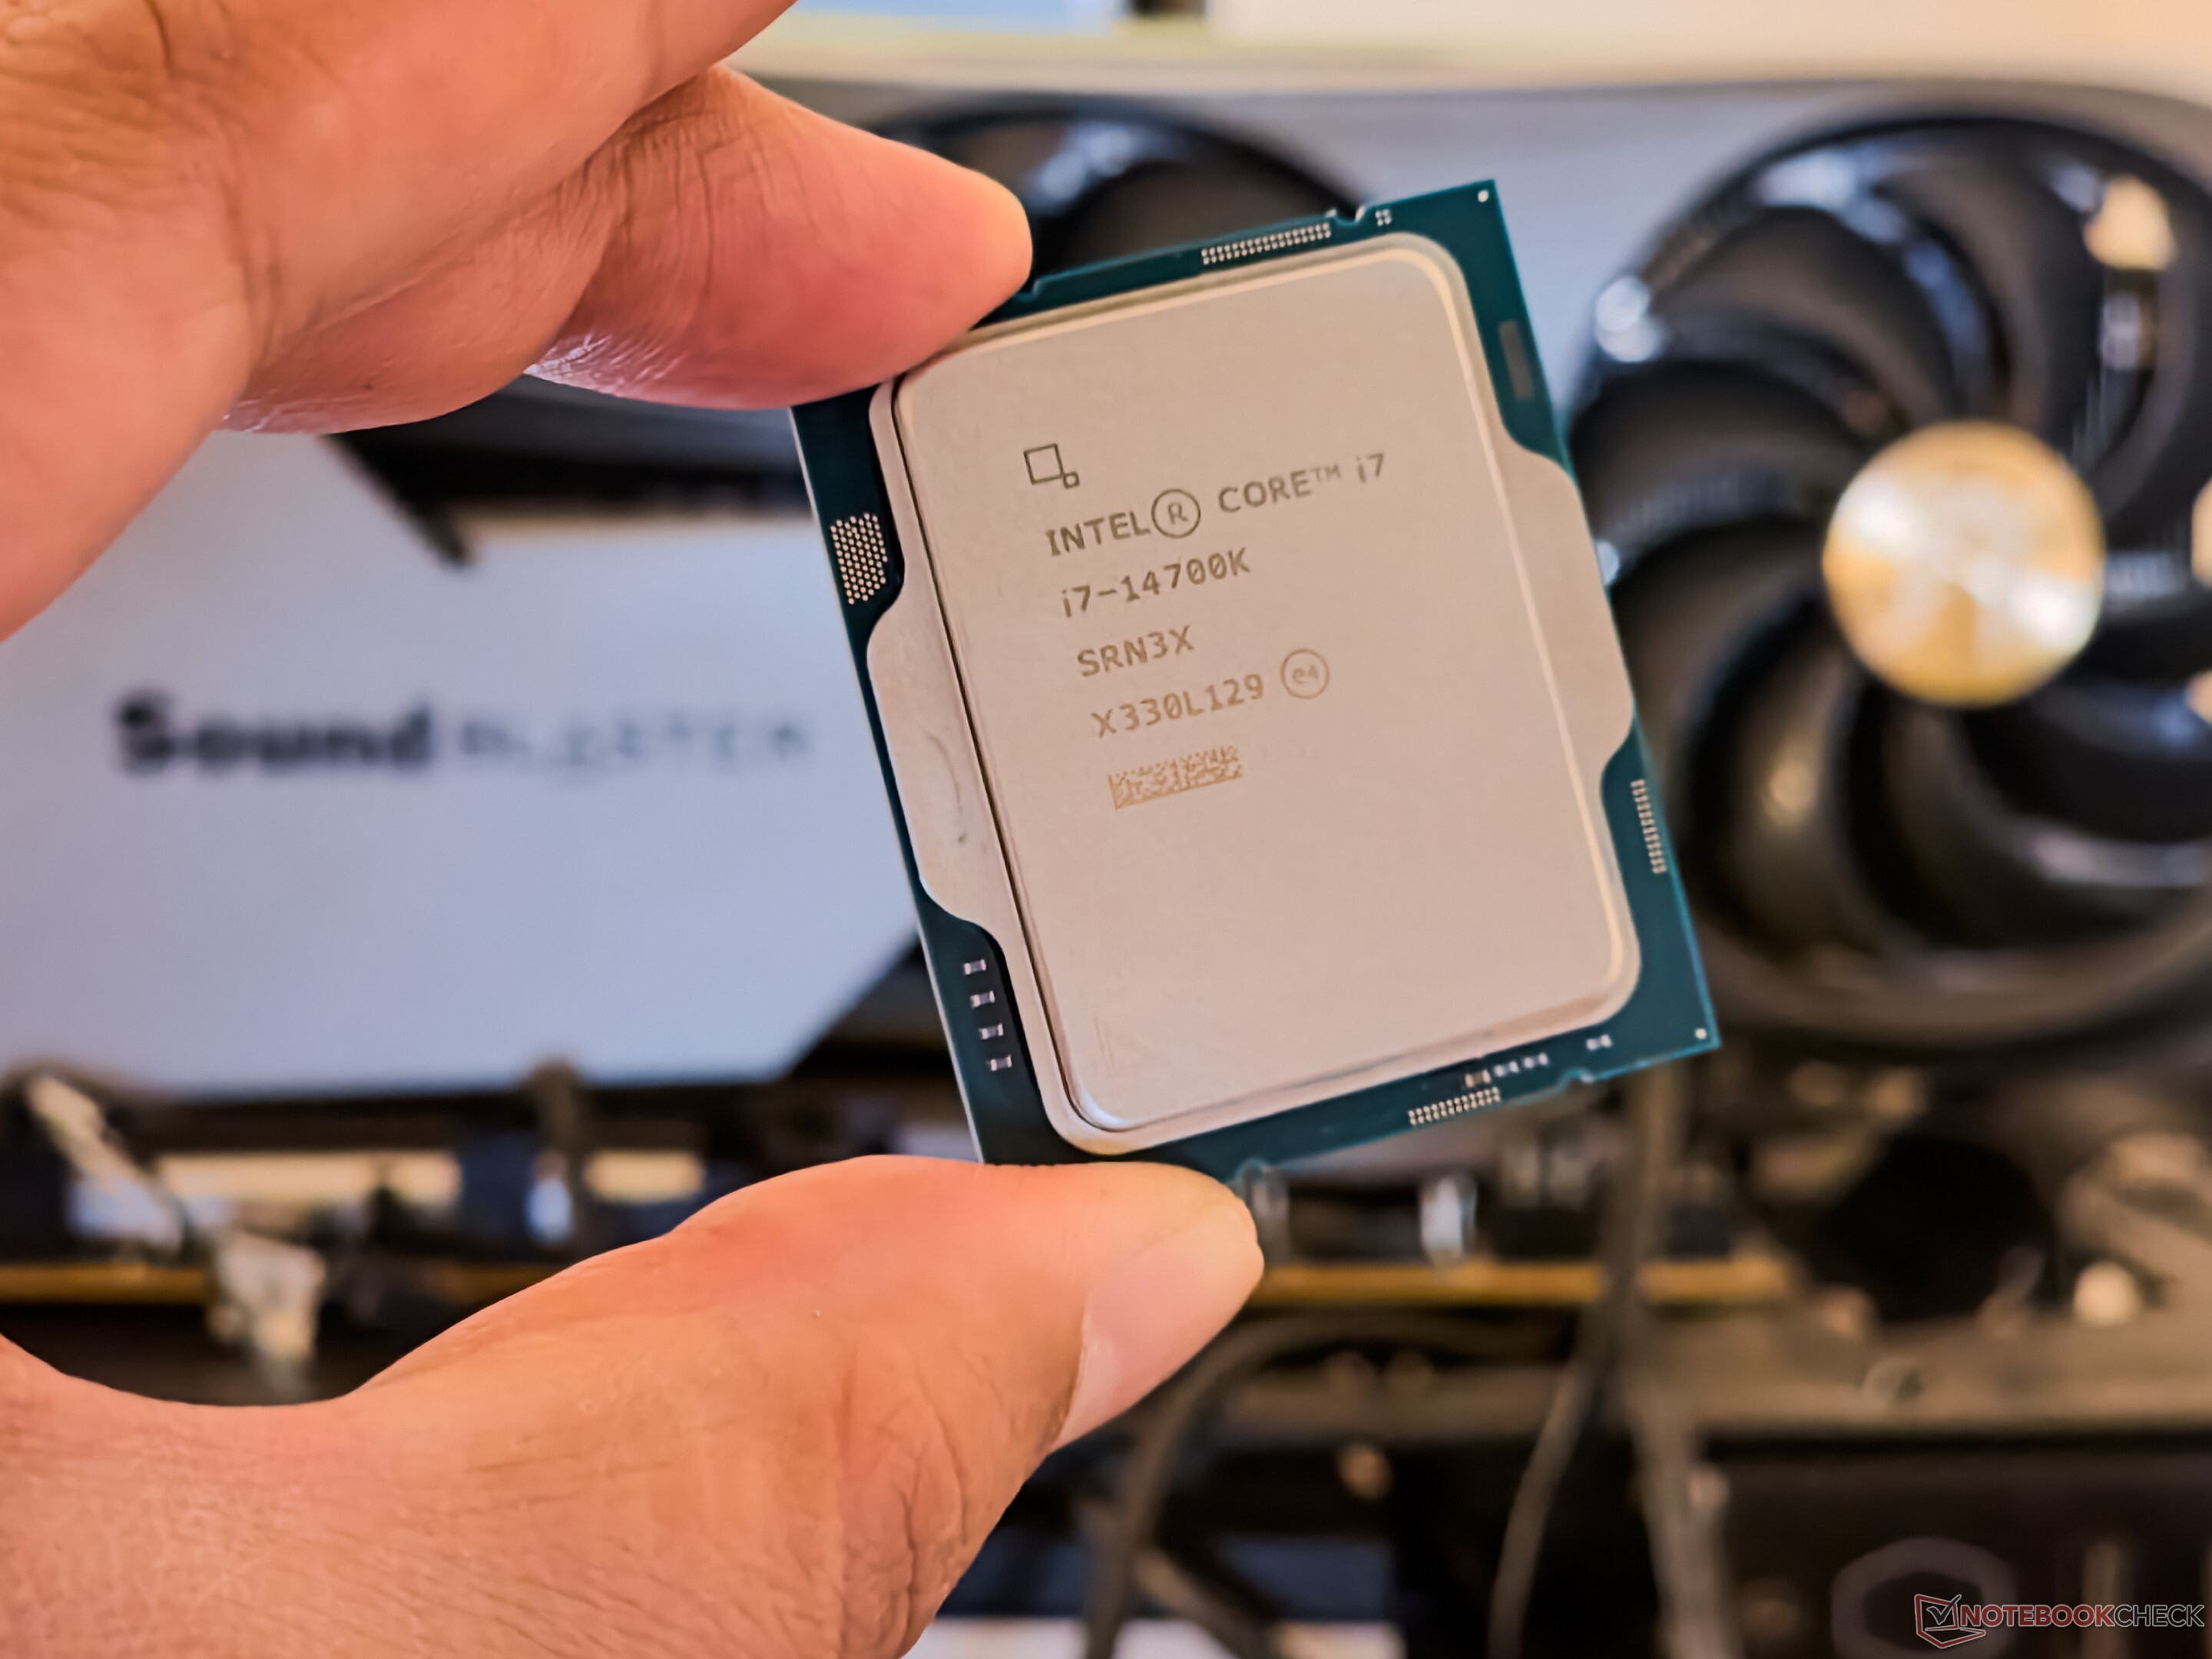 Intel Core i7-14700K Review - Catching the 13900K - Temperatures